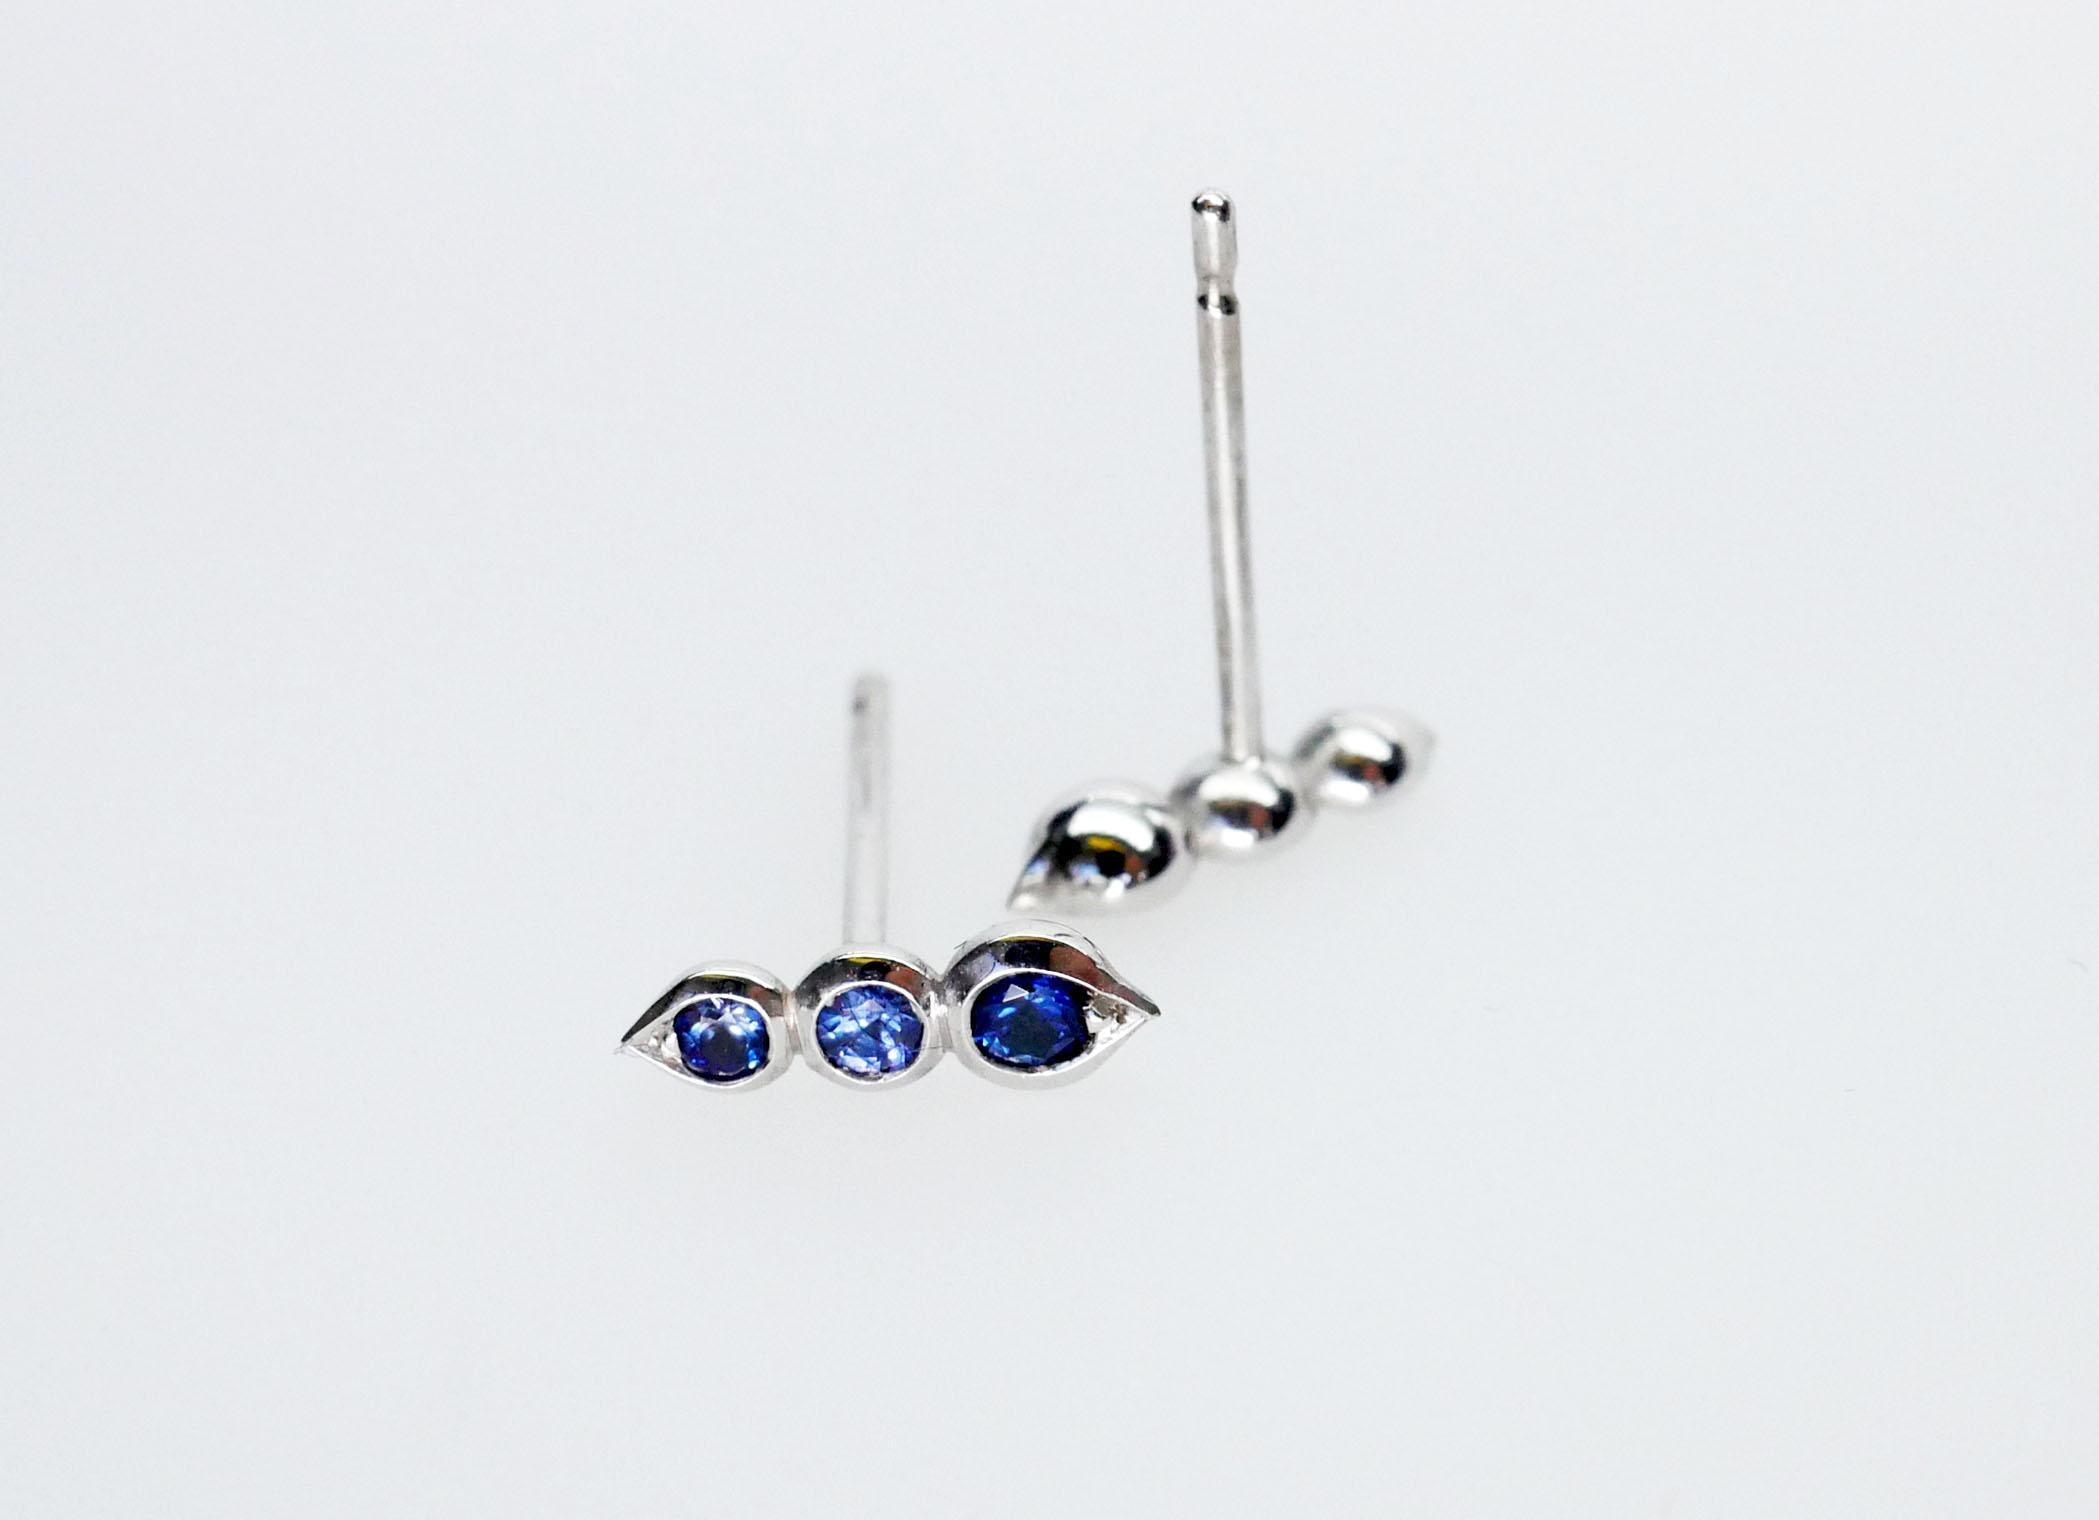 Beautifully hand crafted round blue sapphire stud earrings in 18k white gold. This blue sapphire trio sits in a delicate bezel setting with subtle tear drop shape at each end. Wear it alone or mix and match with other earring styles.

Total Sapphire